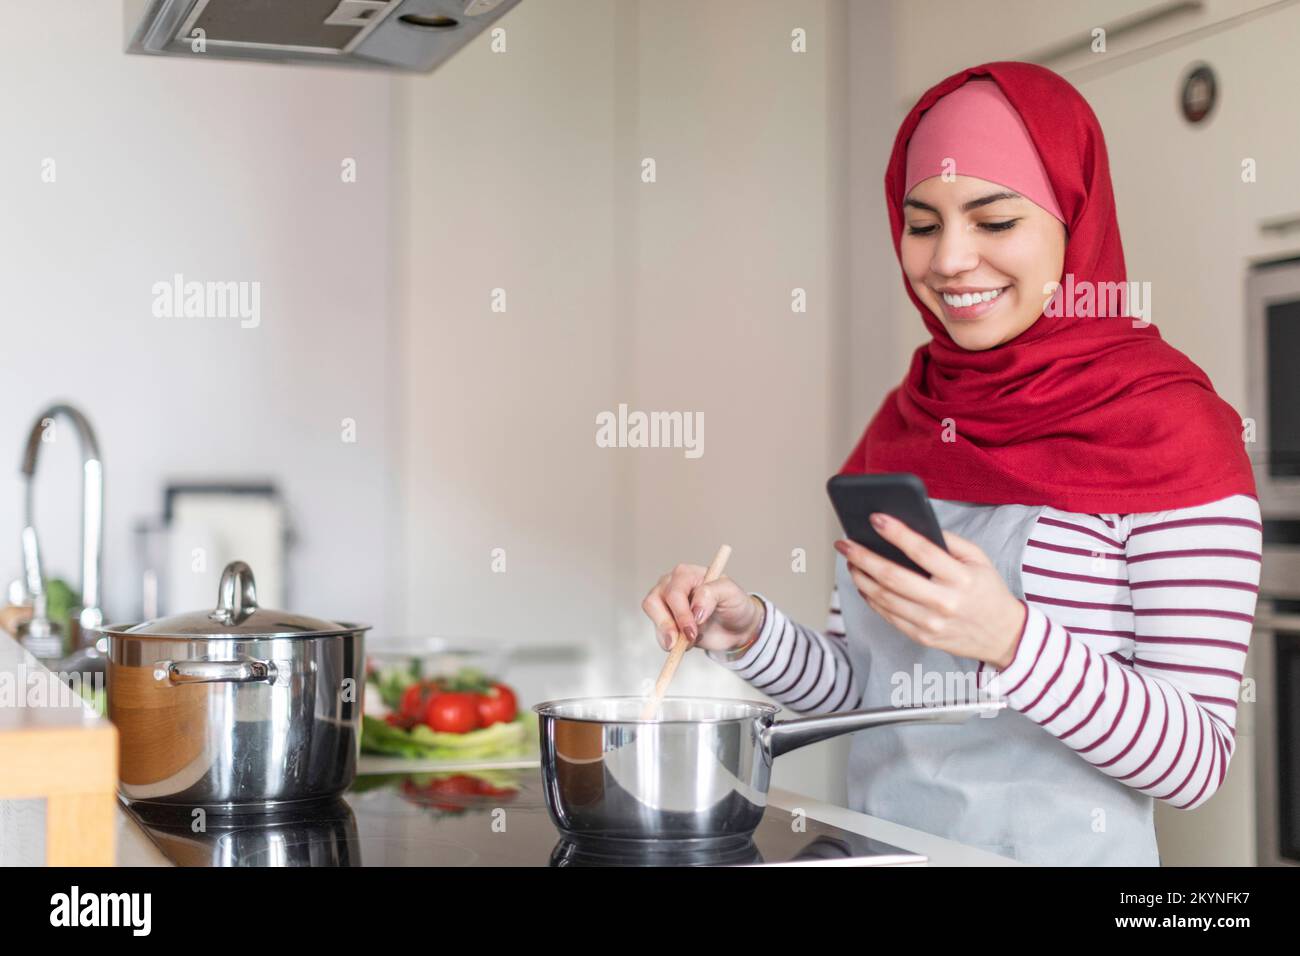 Muslim lady cooking at home, reading culinary blog on smartphone Stock Photo